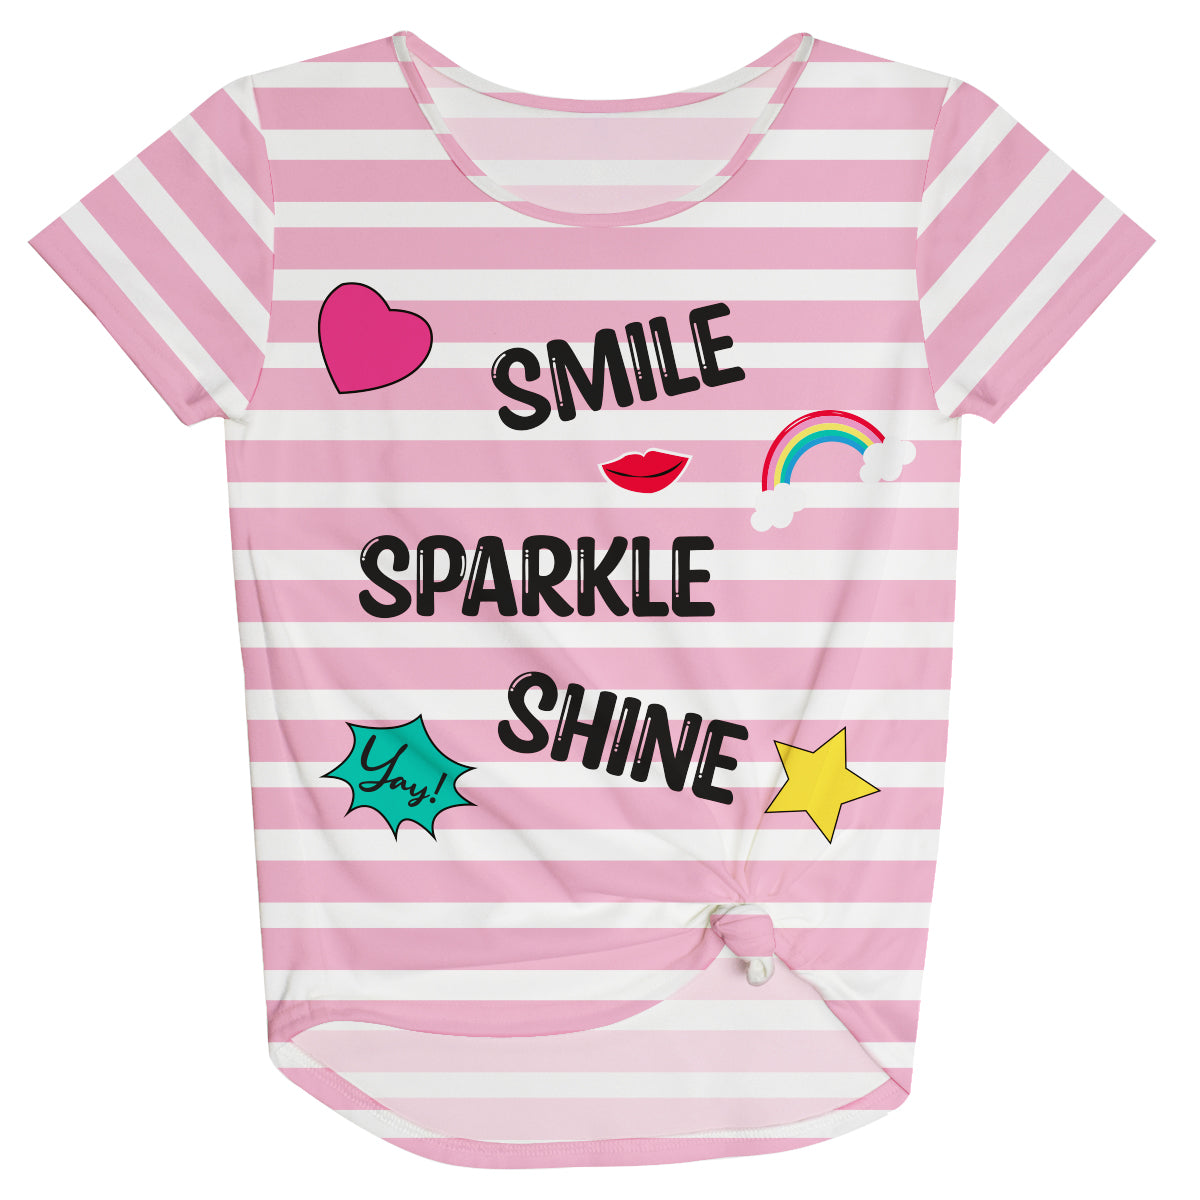 Smile Sparkle Shine White and Pink Stripes Knot Top